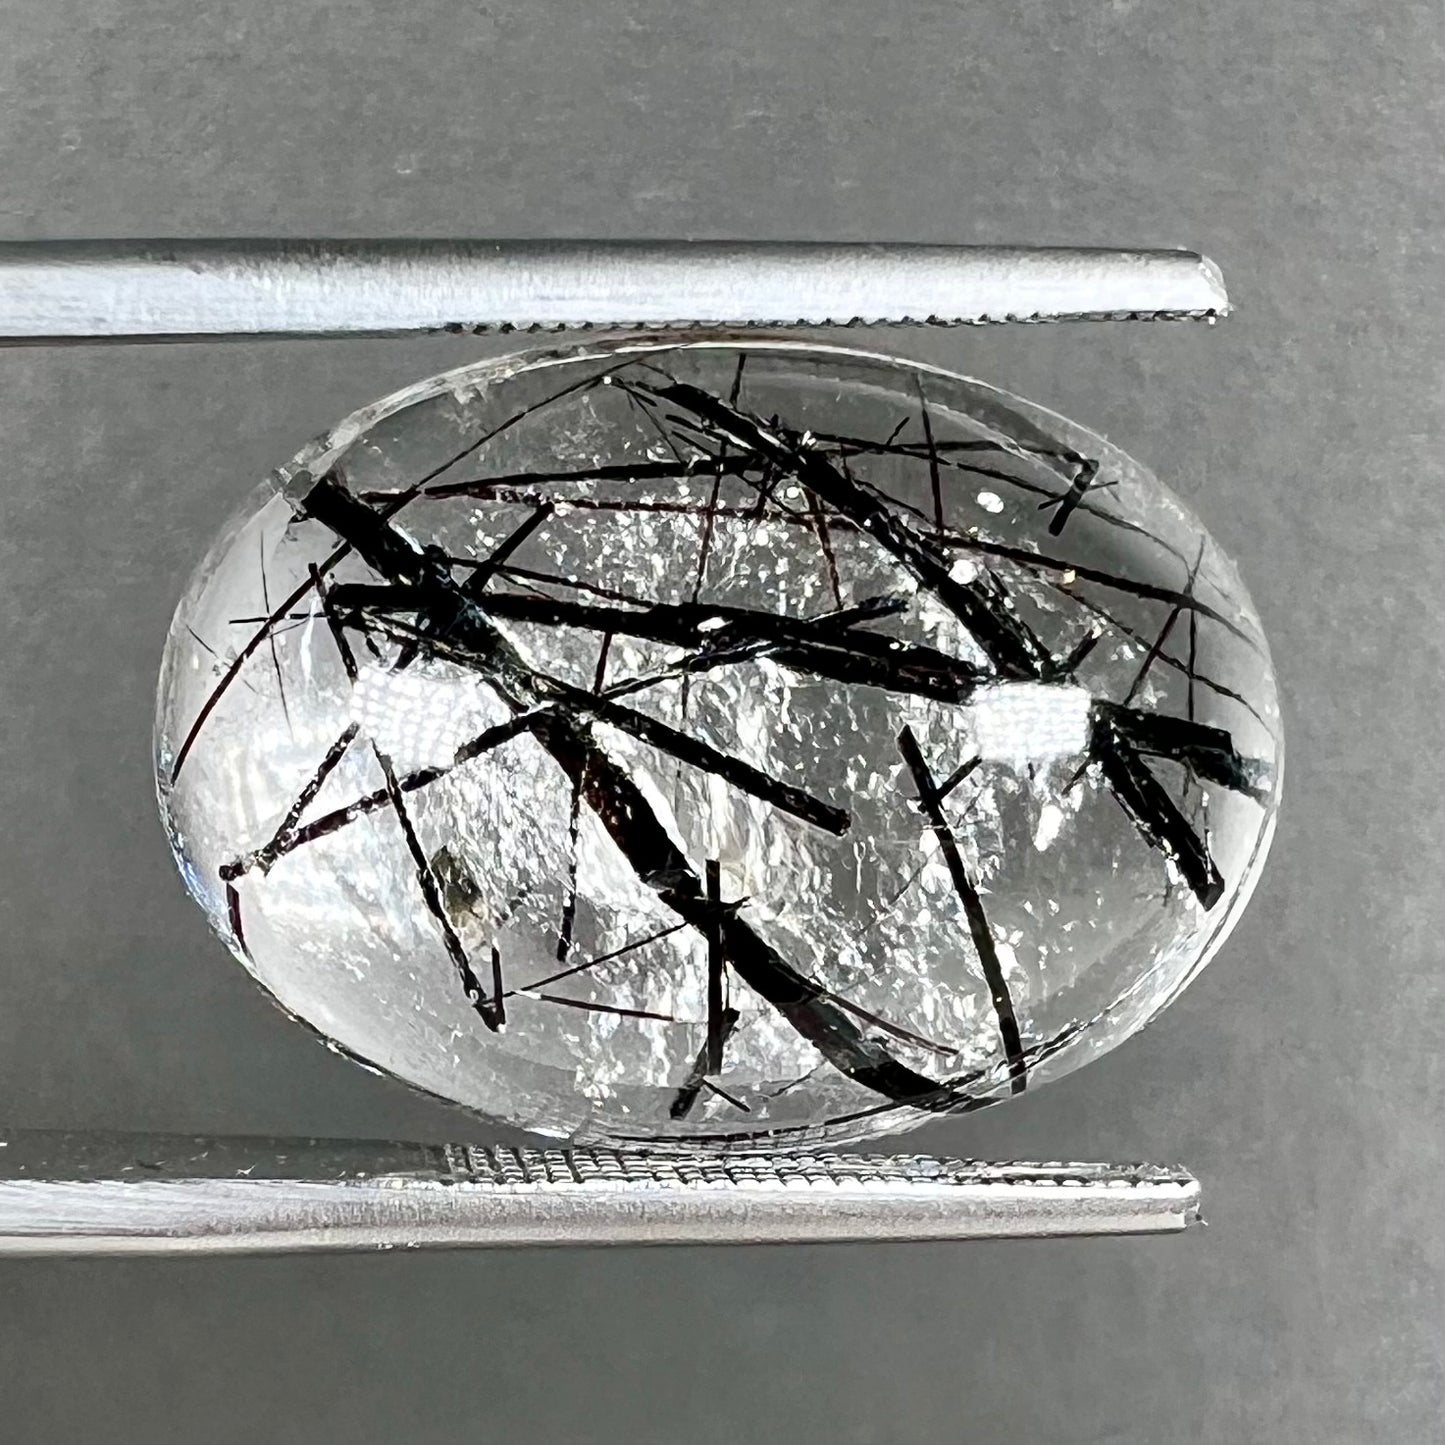 A loose, oval cabochon cut clear quartz stone with black tourmaline needle inclusions.